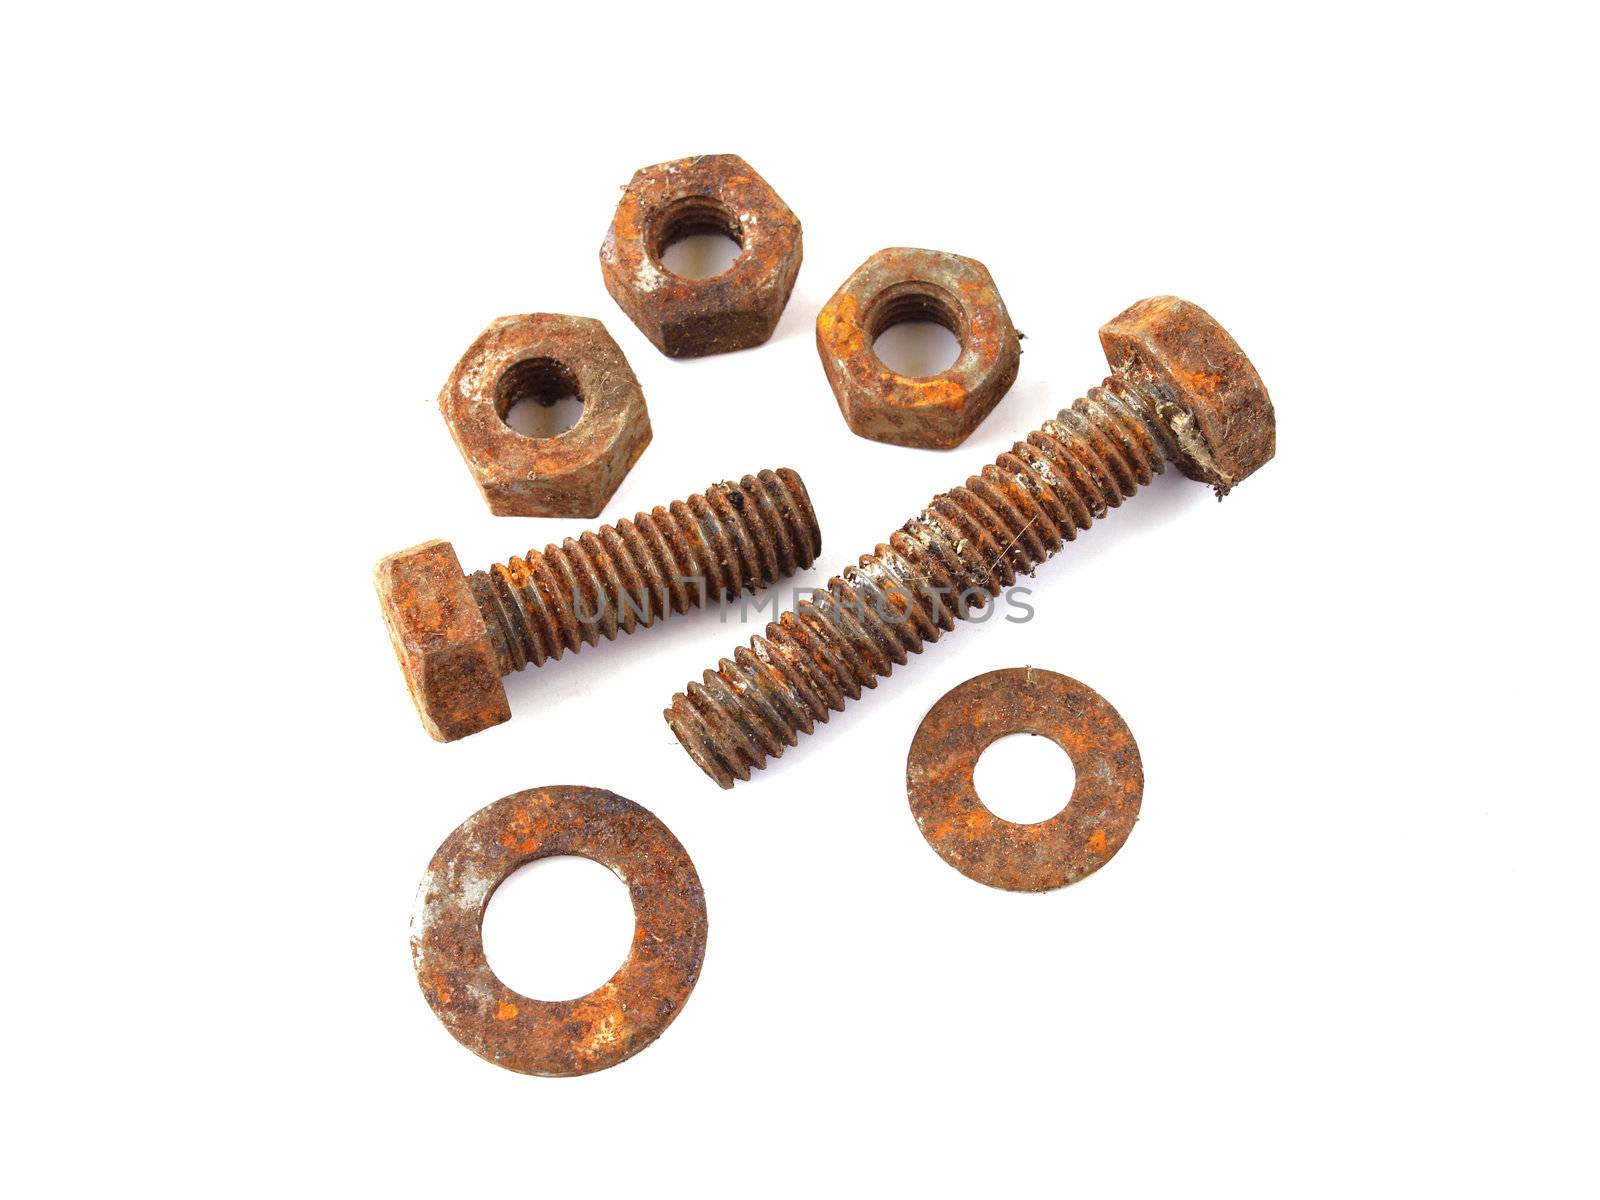 Rusty nuts and bolts on a plane white background.